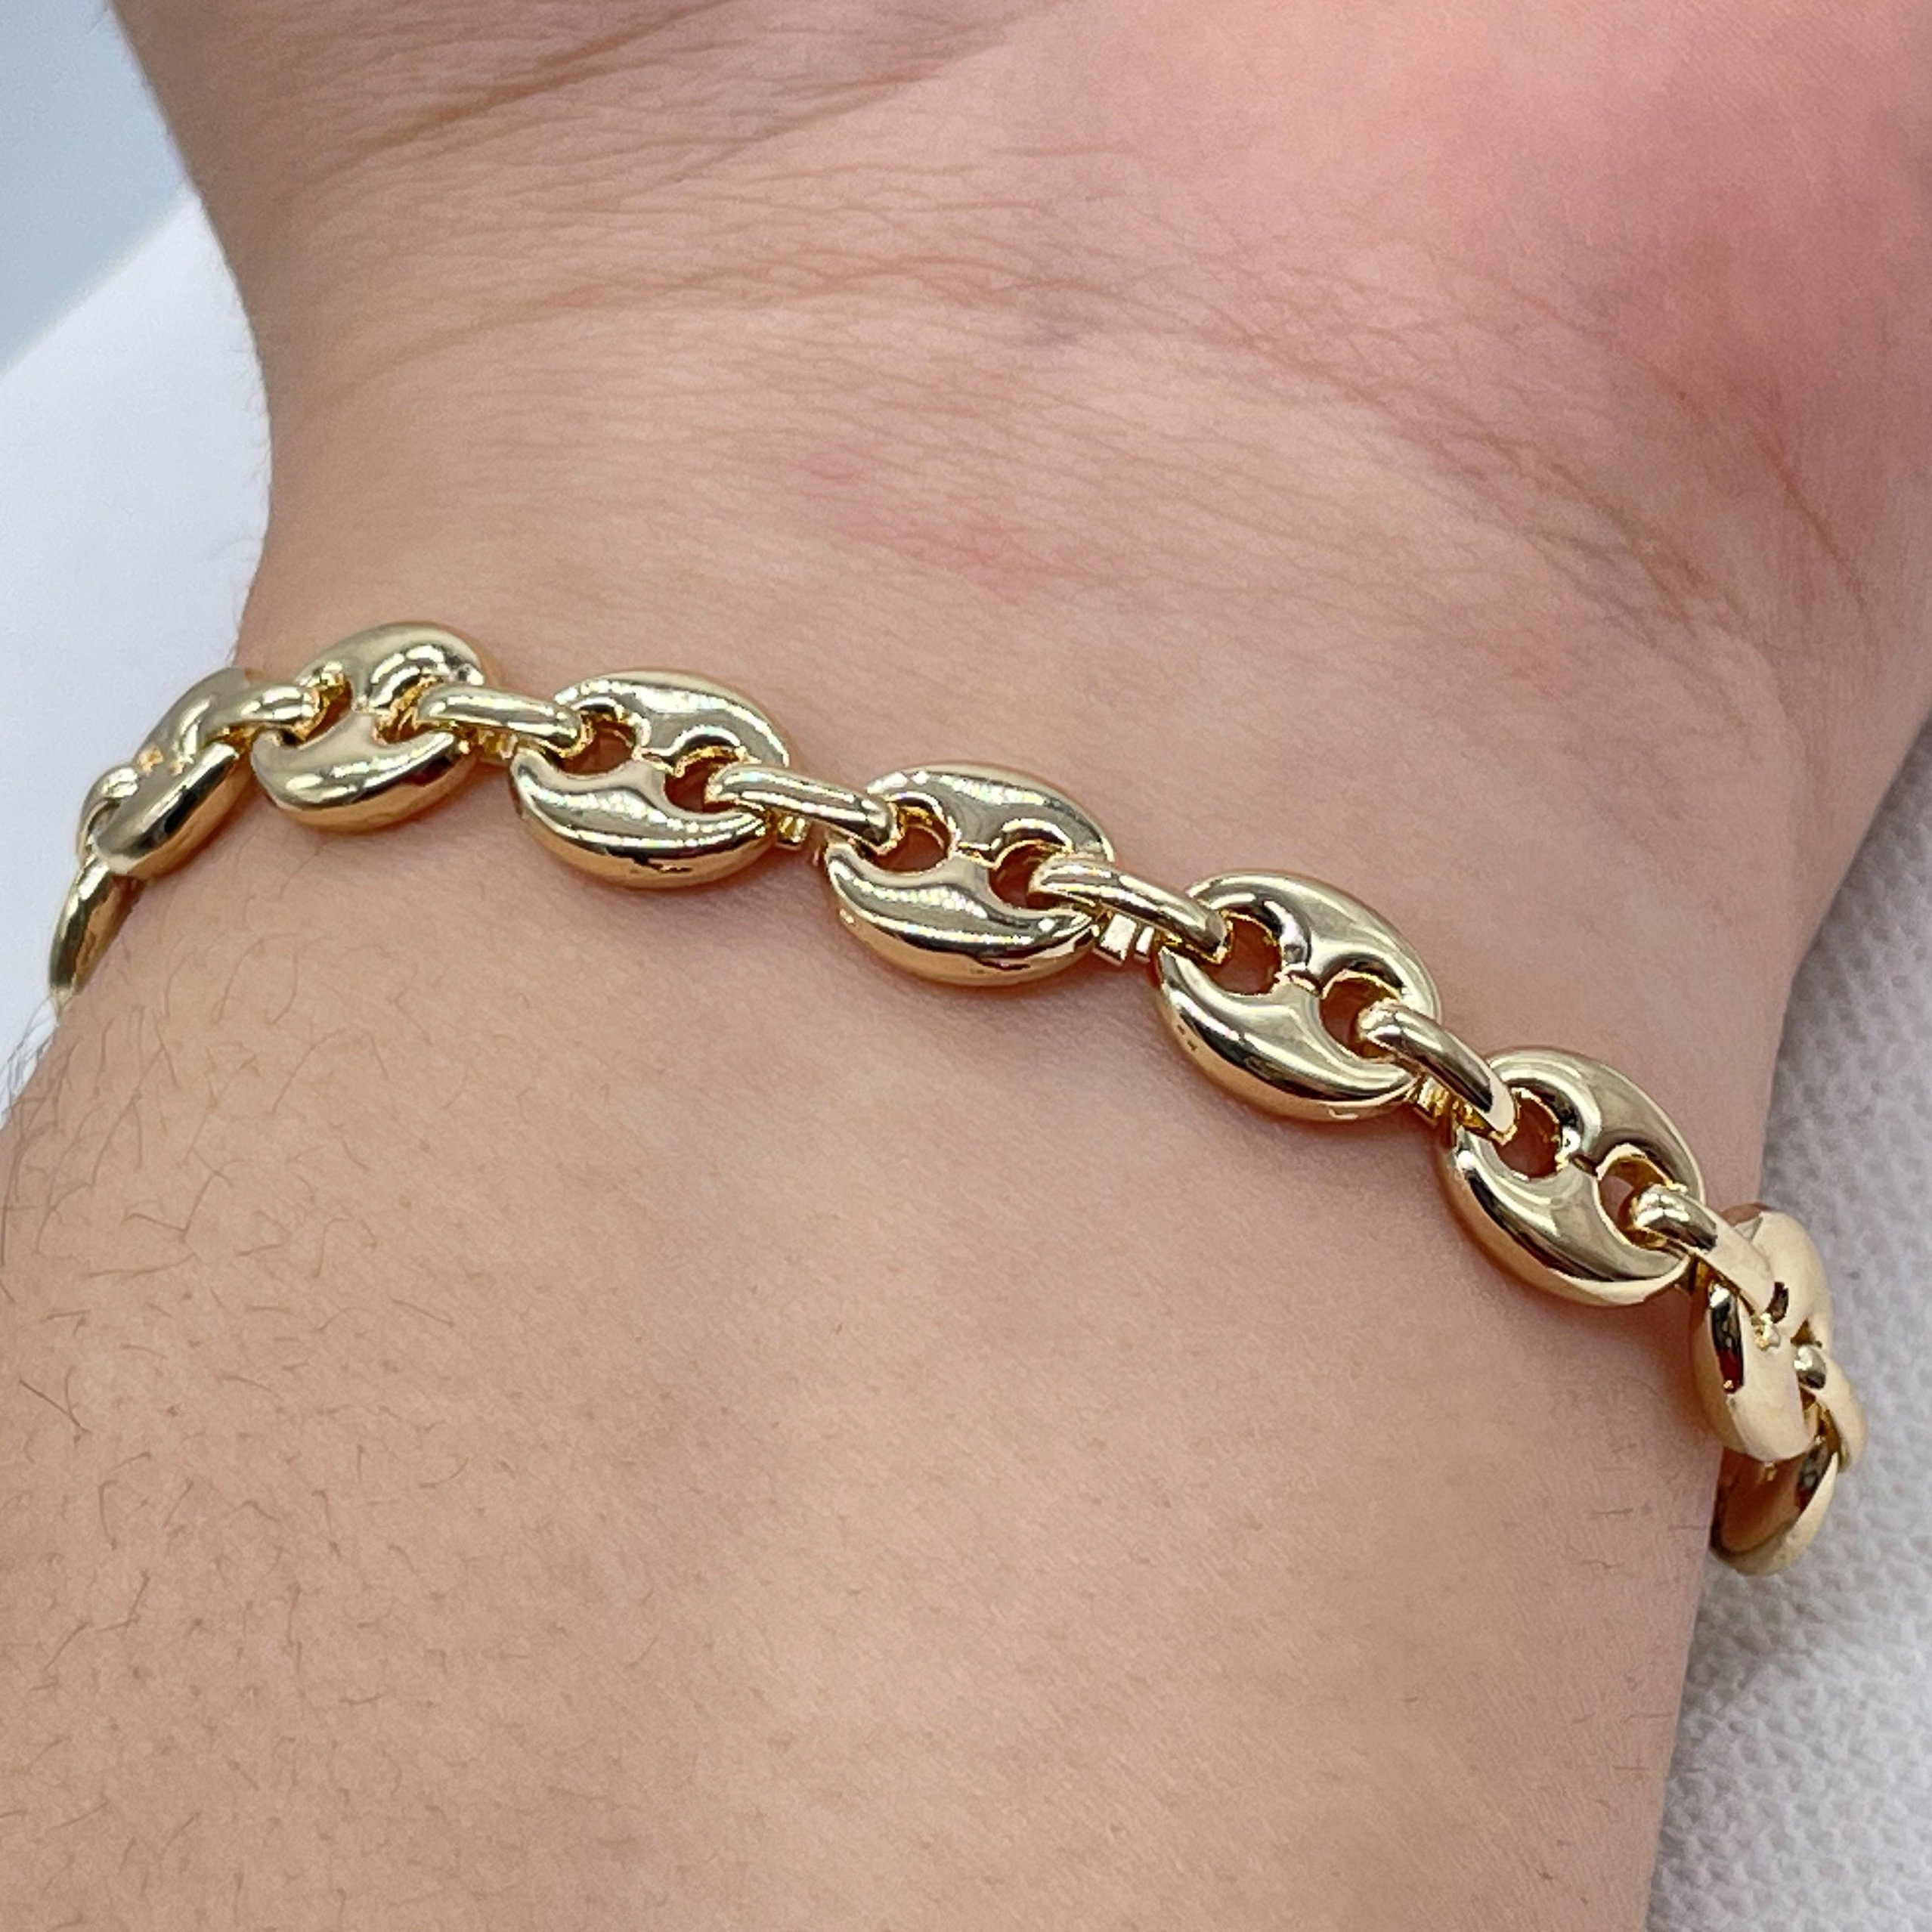 NEW! STAINLESS STEEL BRACELETS Cuban Cut Hypoallergenic Gold Tone Various  Sizes | eBay